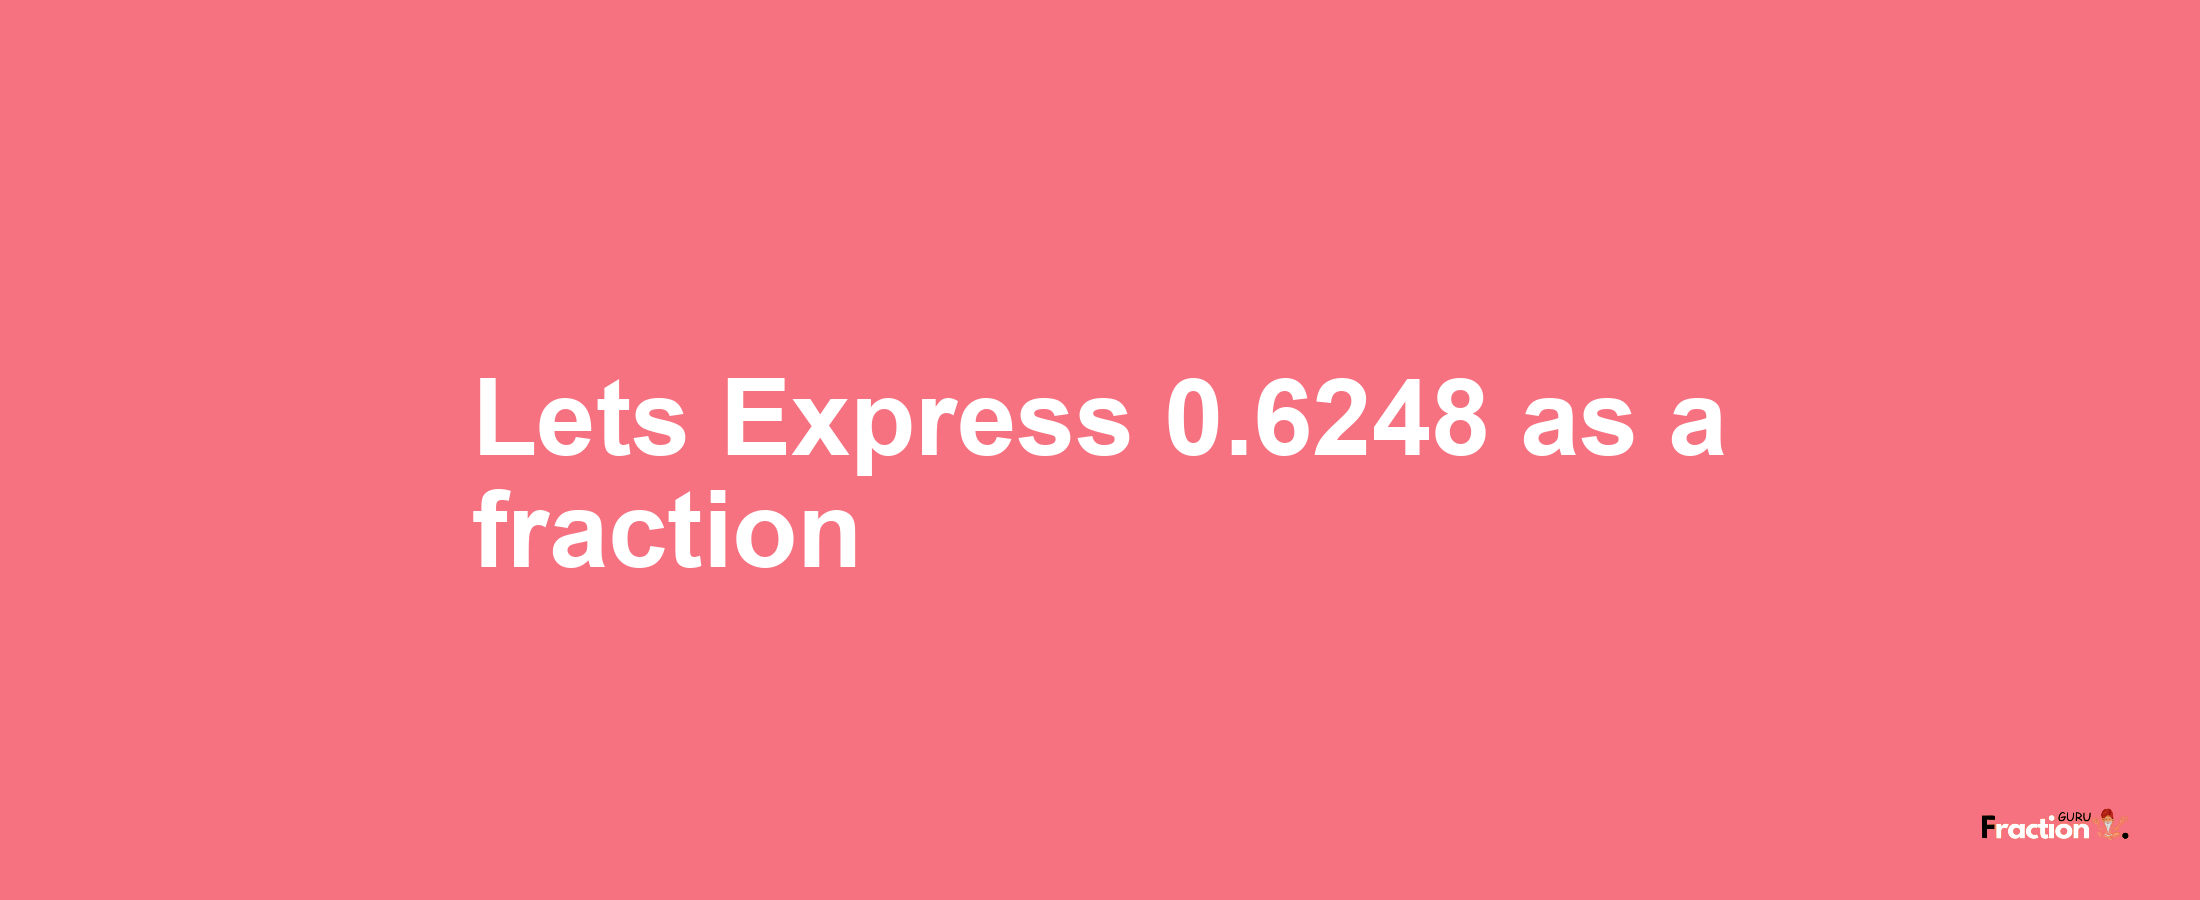 Lets Express 0.6248 as afraction